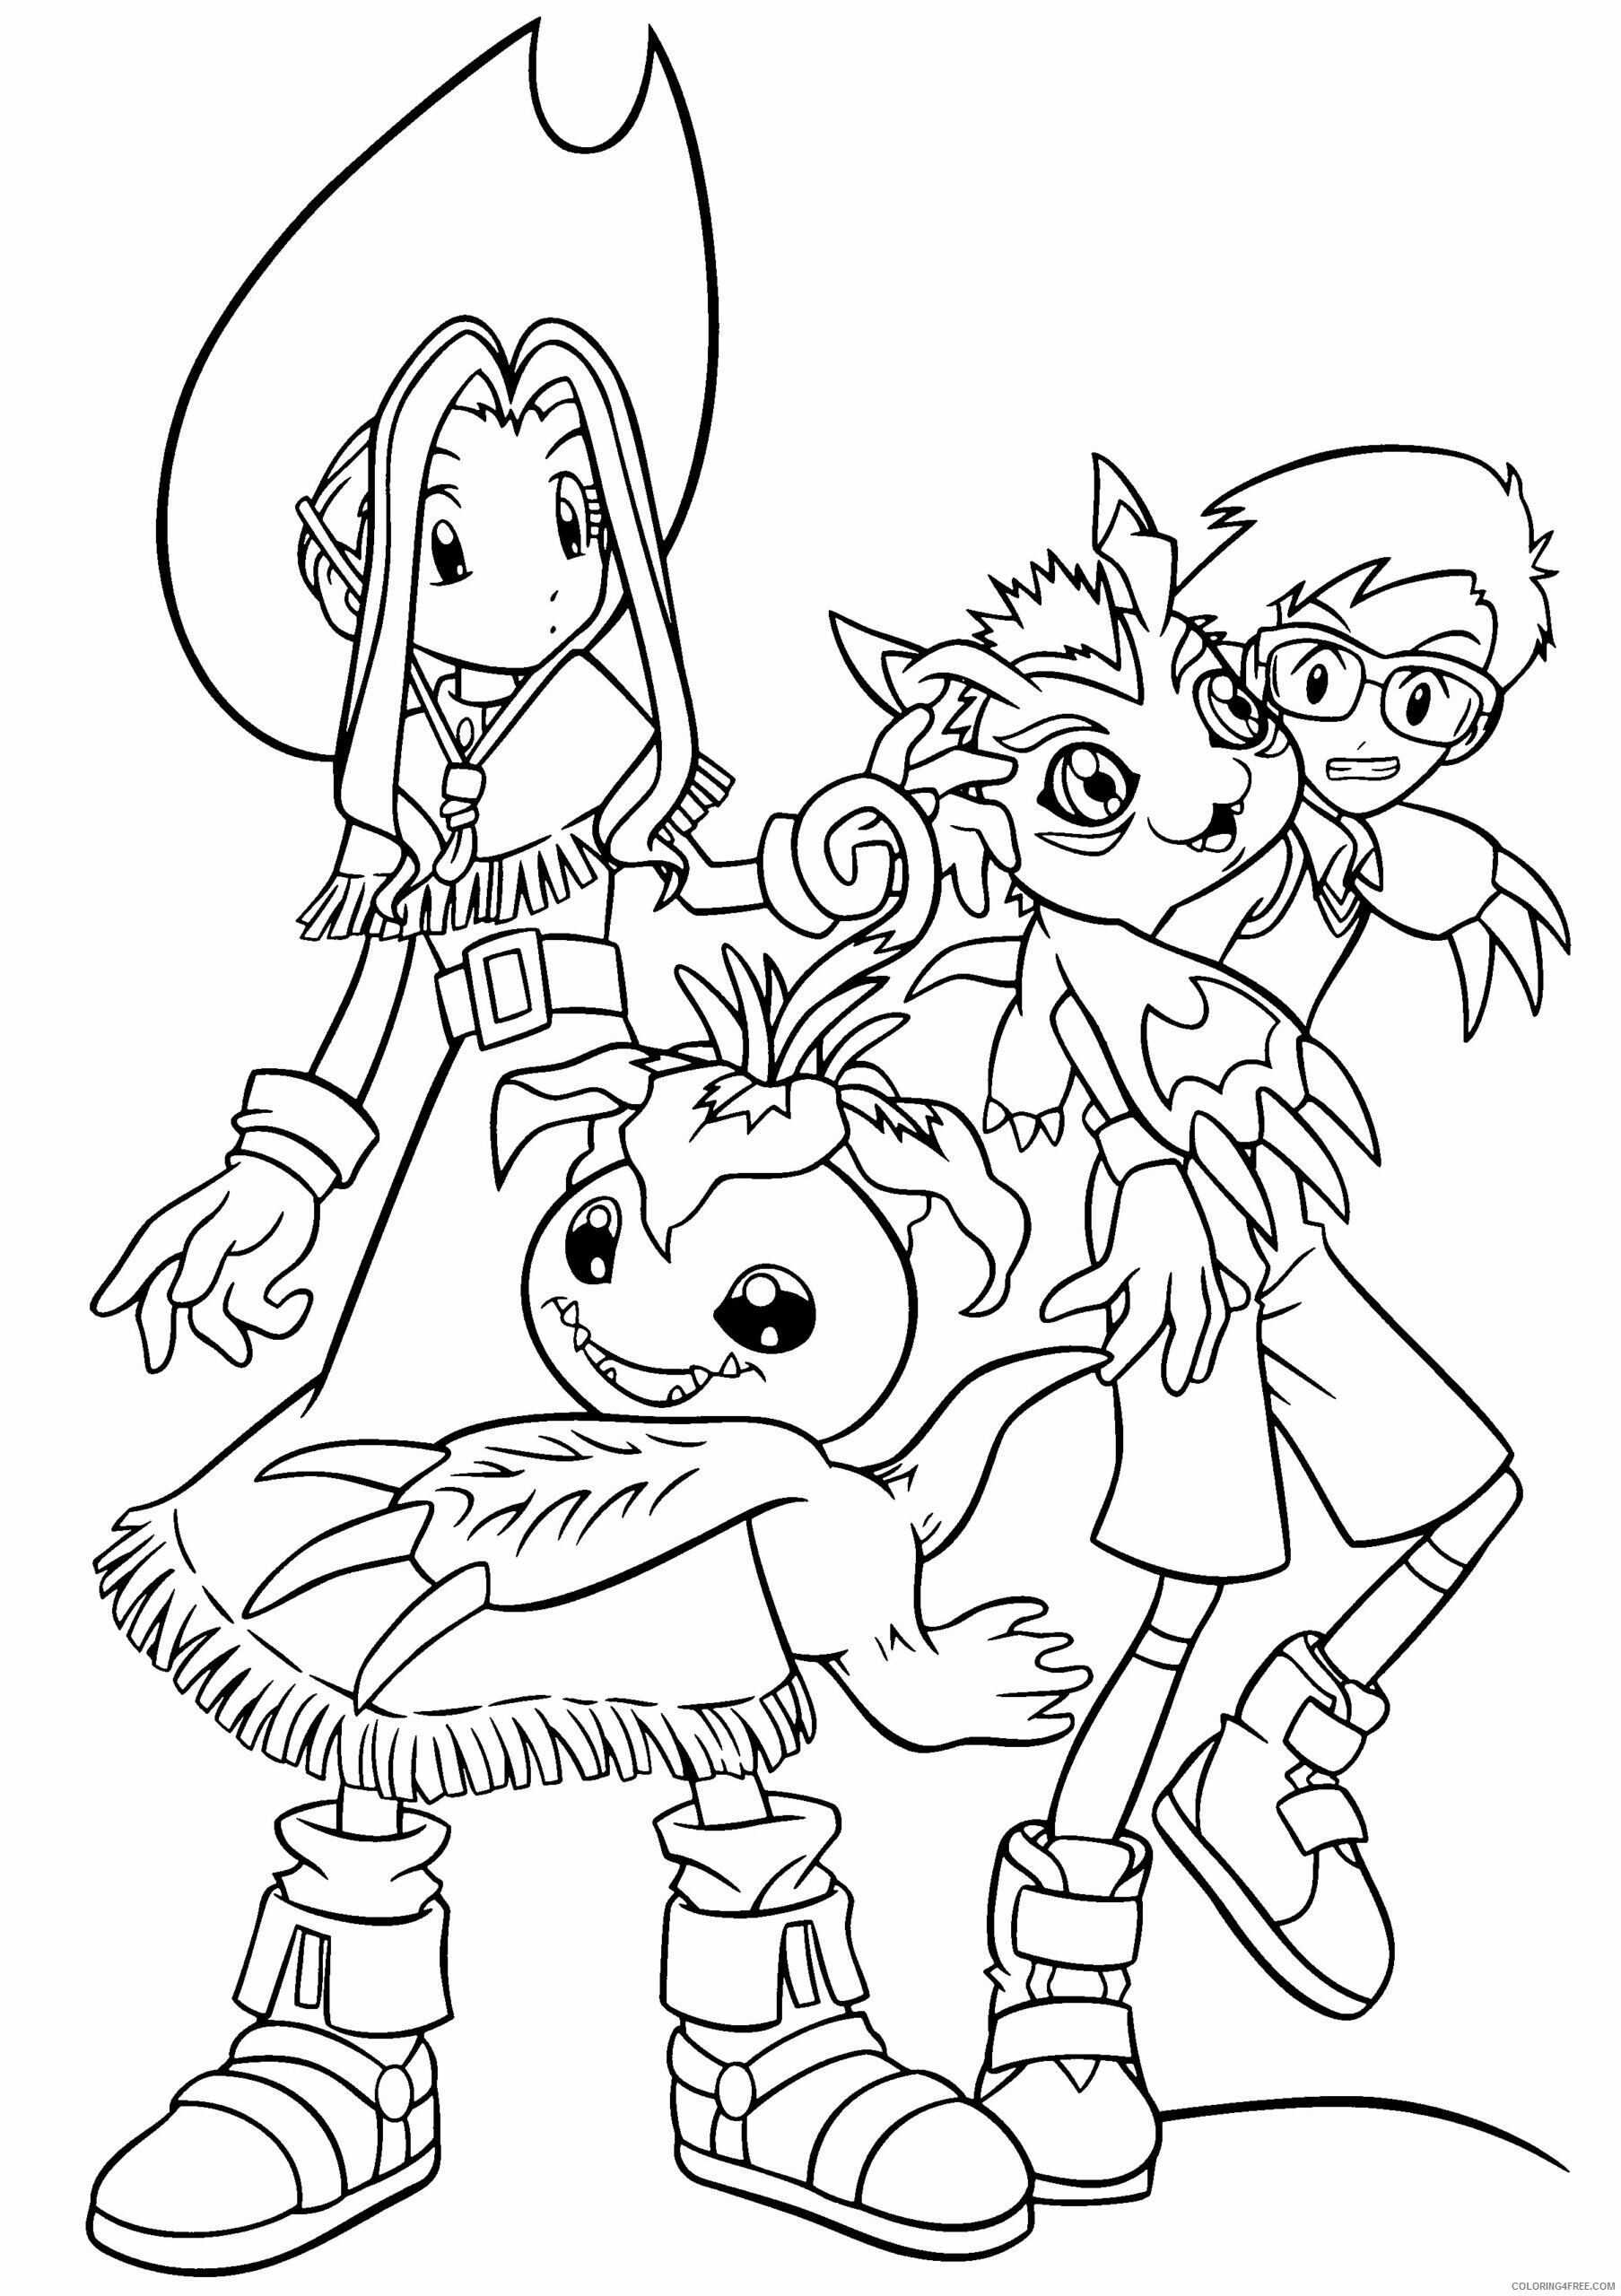 Digimon Printable Coloring Pages Anime digimon 112 2021 0219 Coloring4free